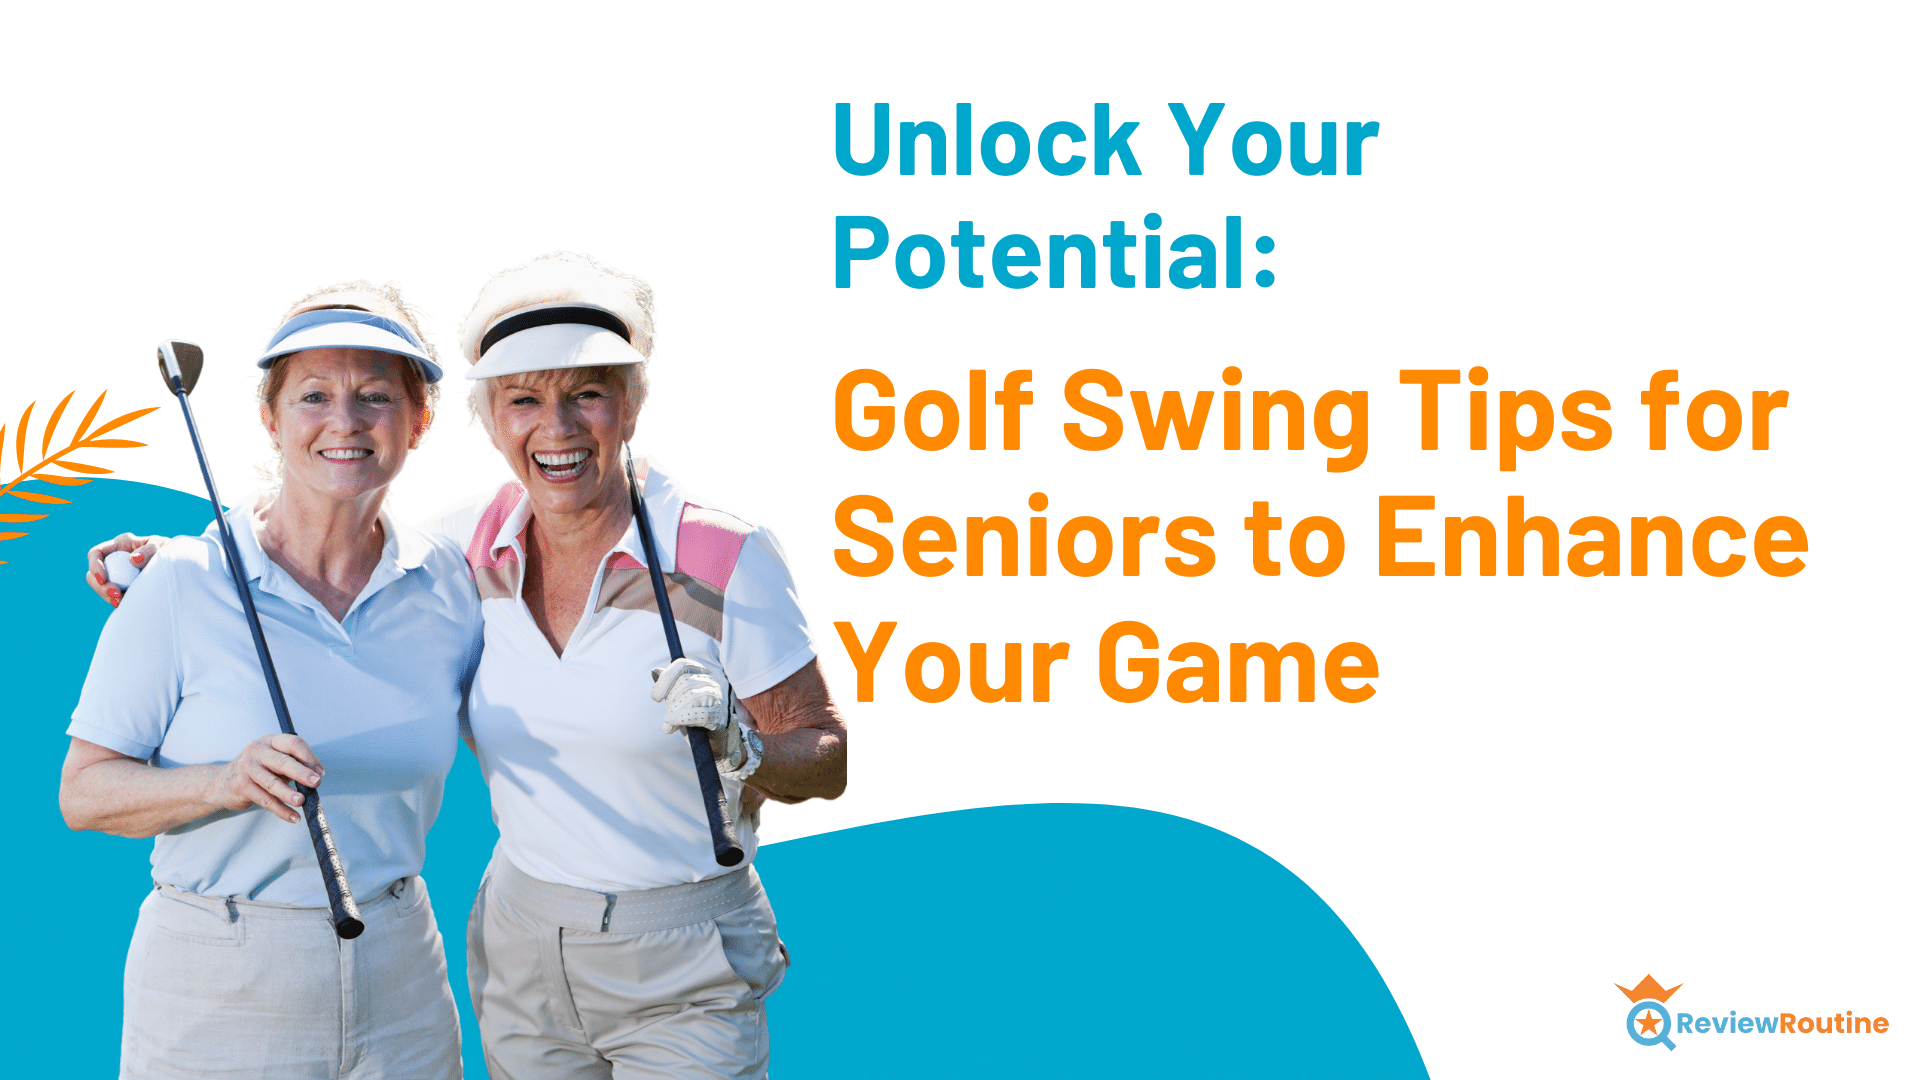 Unlock Your Potential: Golf Swing Tips for Seniors to Enhance Your Game